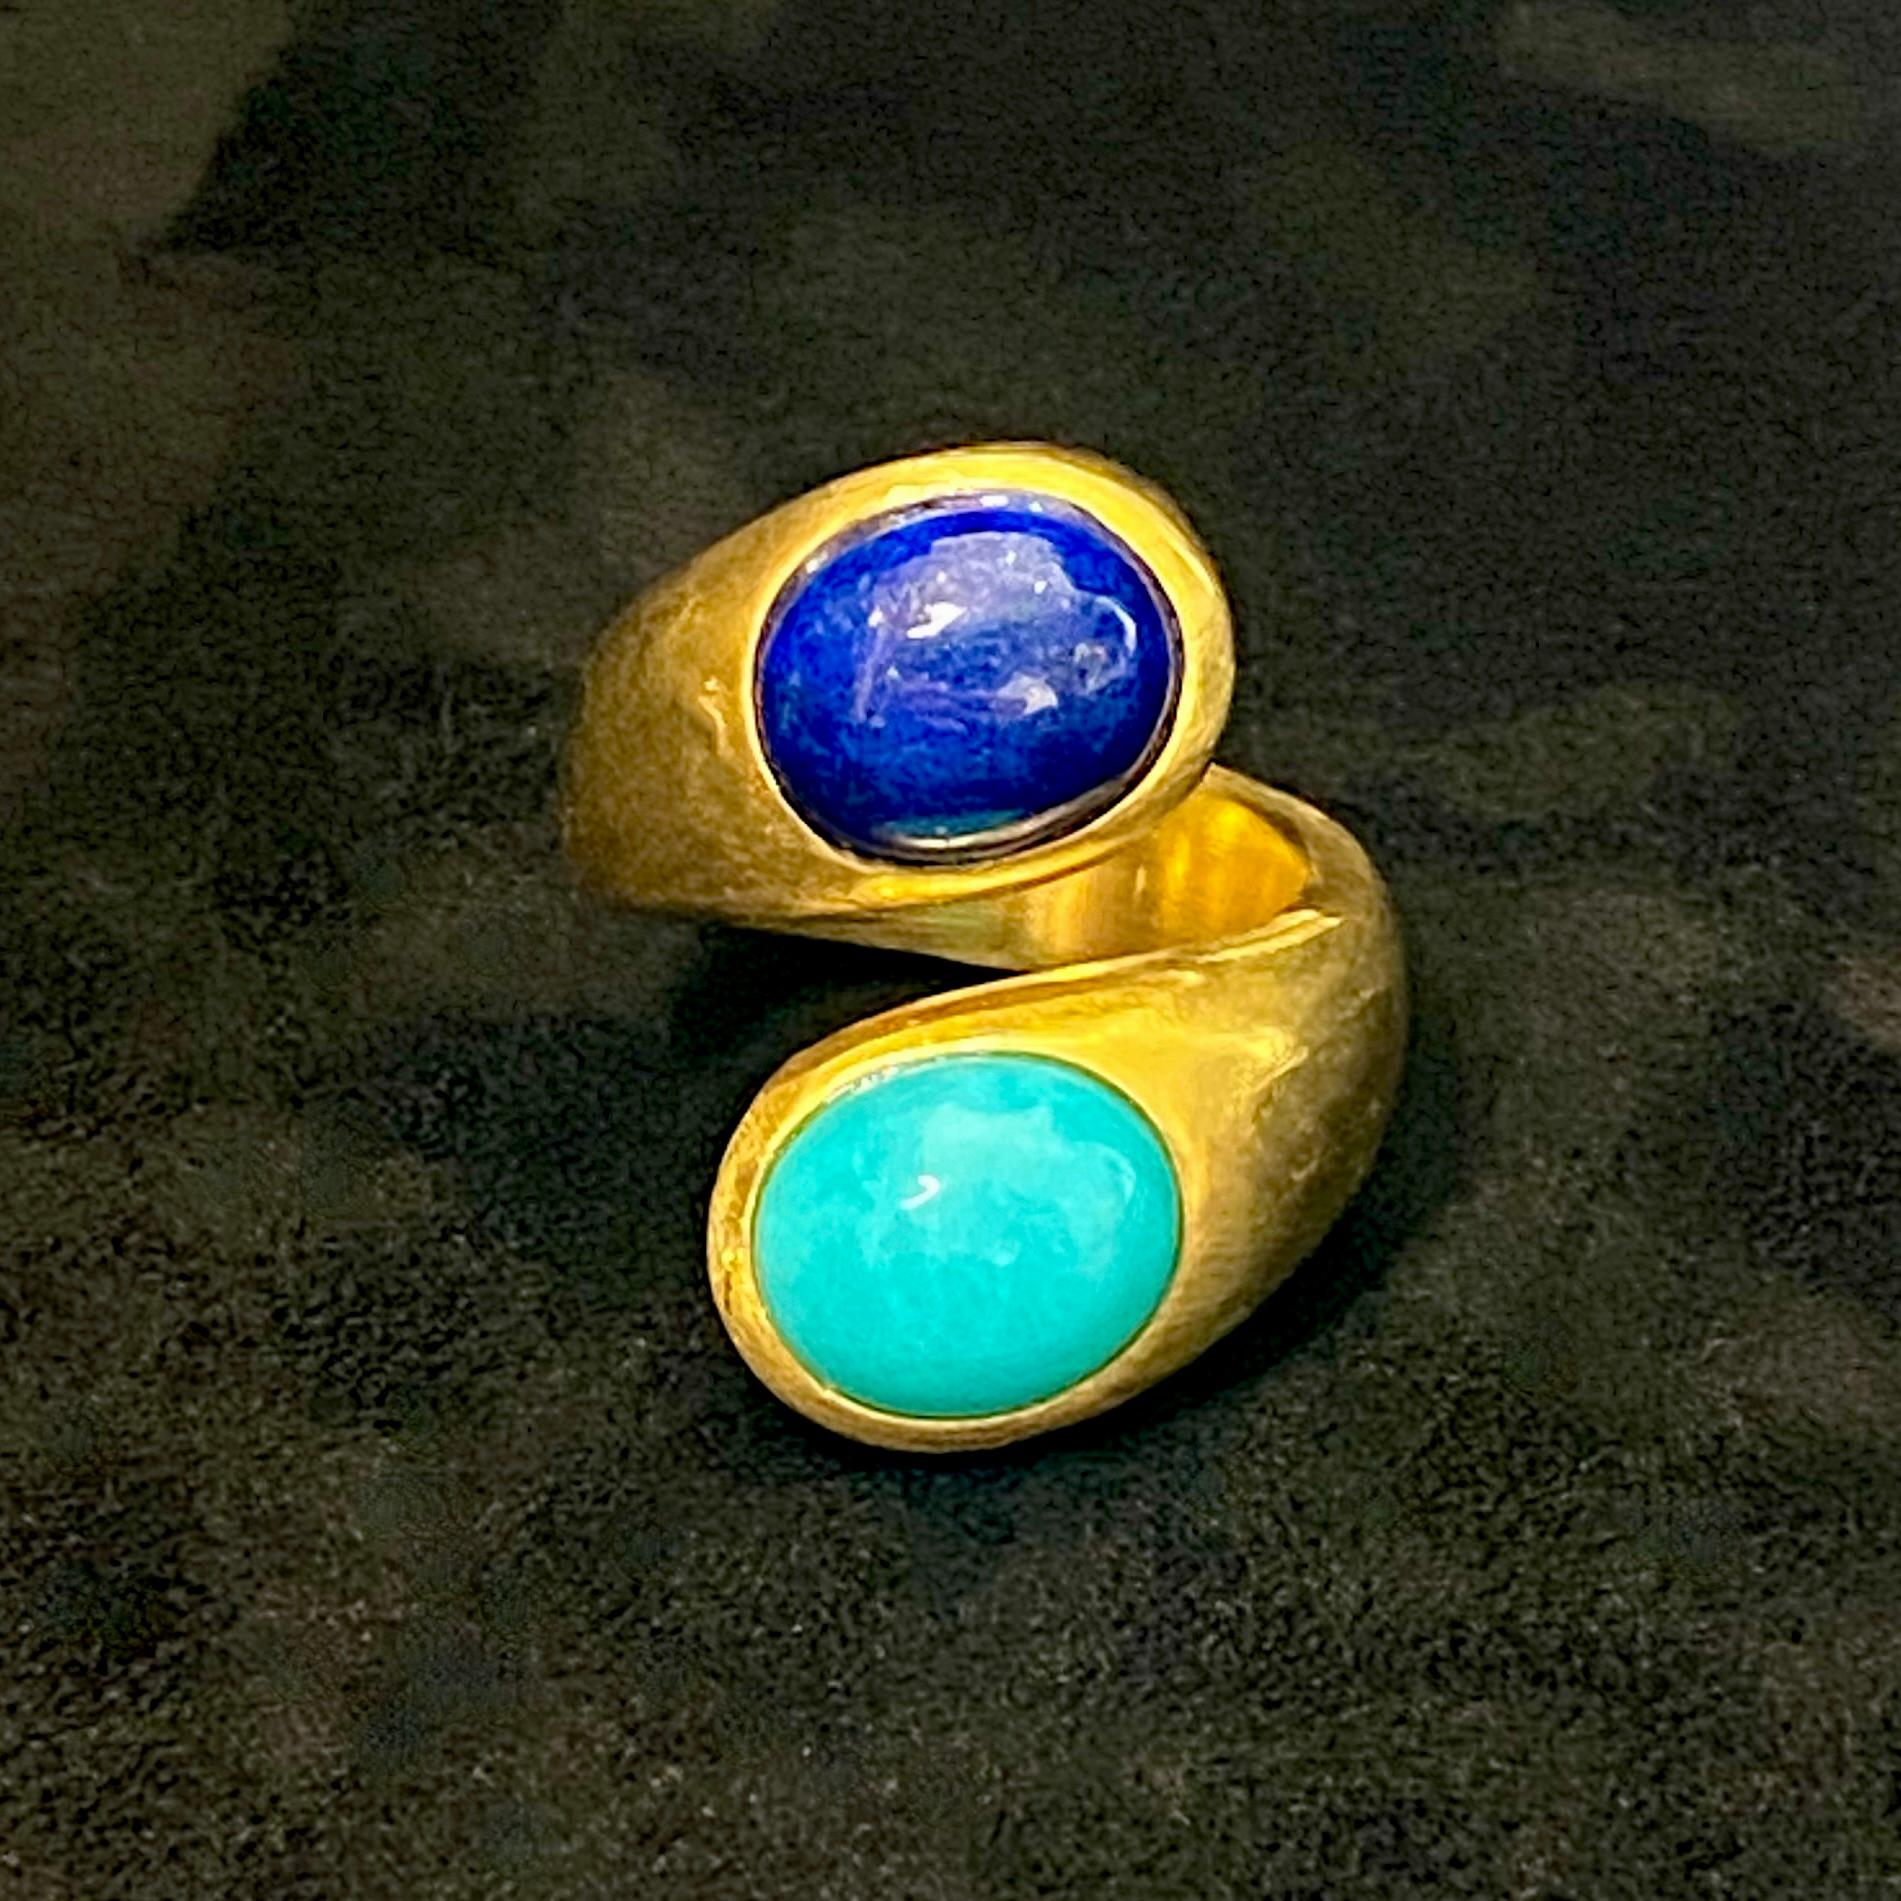 The bezel set Lapis & Amazonite set within a domed 'rough' polished crossover ring - the combination of Lapis & Amazonite is truly wonderful, perfect for Summer or Winter, night or day, we're sure this is going to become a firm favourite of any